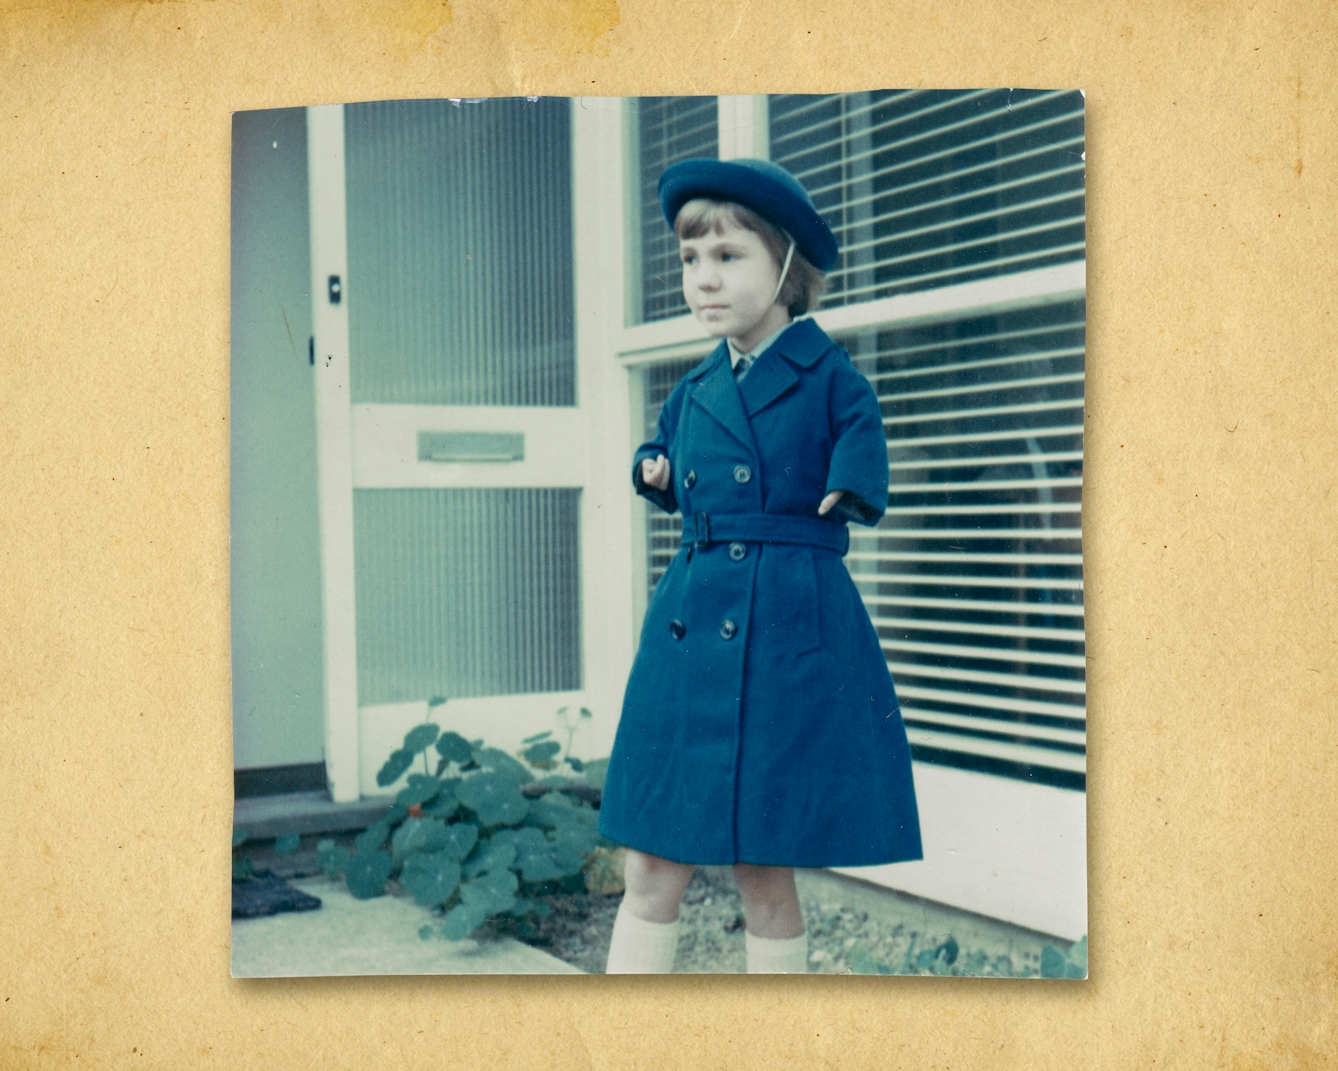 Photograph of a colour photographic print roughly cut around the edges, resting on a brown paper textured background. The print shows a small young girl in a long blue coat and matching blue hat. She is standing outside a house with a large front window and glass panelled front door which is open. On the ground are the leaves of a plant. The girl is looking off to the left. Her arms are short as a result of her mother being prescribed Thalidomide during her pregnancy. 